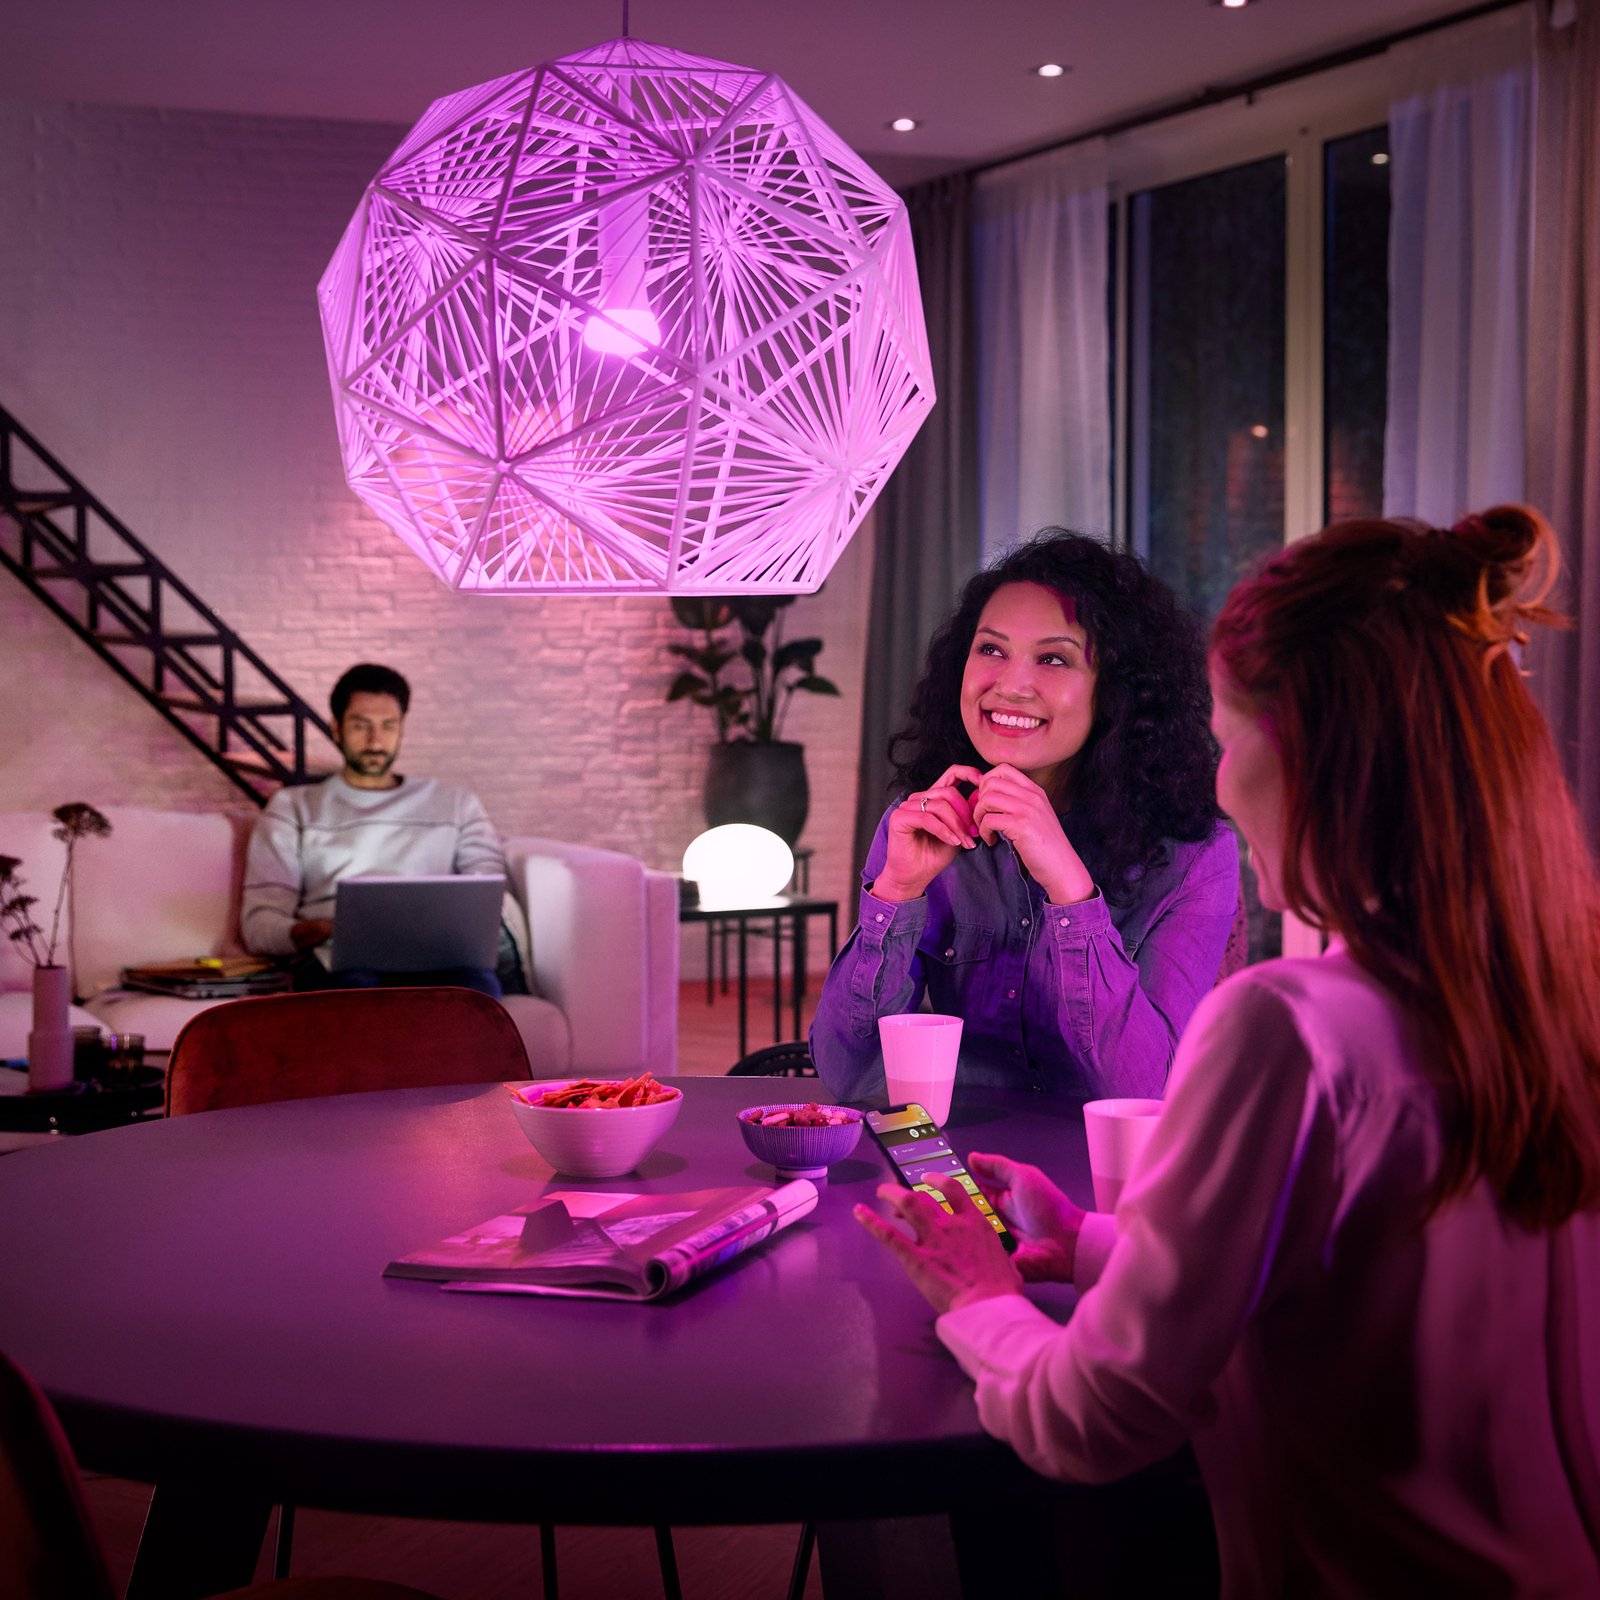 Philips Hue White&Color Ambiance LED E27 9W 1100lm